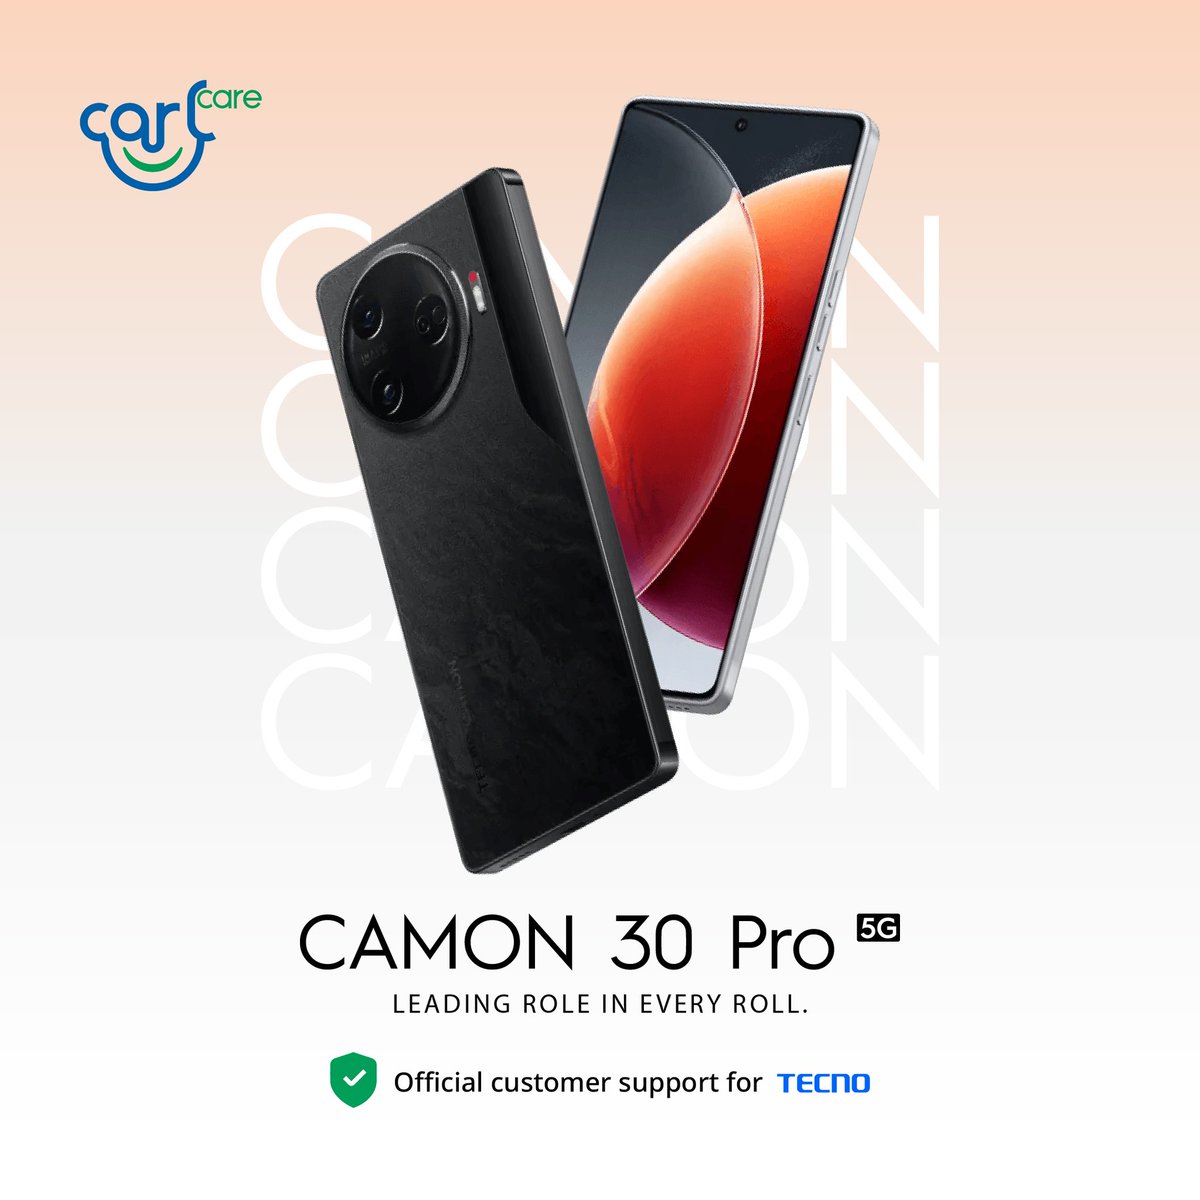 Hello Fam
Yesterday TECNO Mobile launched the #CAMON30Series and we are here to remind you that we solve any issues!  Carlcare is the Official customer support for TECNO.
#CarlcareService #YesWeCare #Tecno